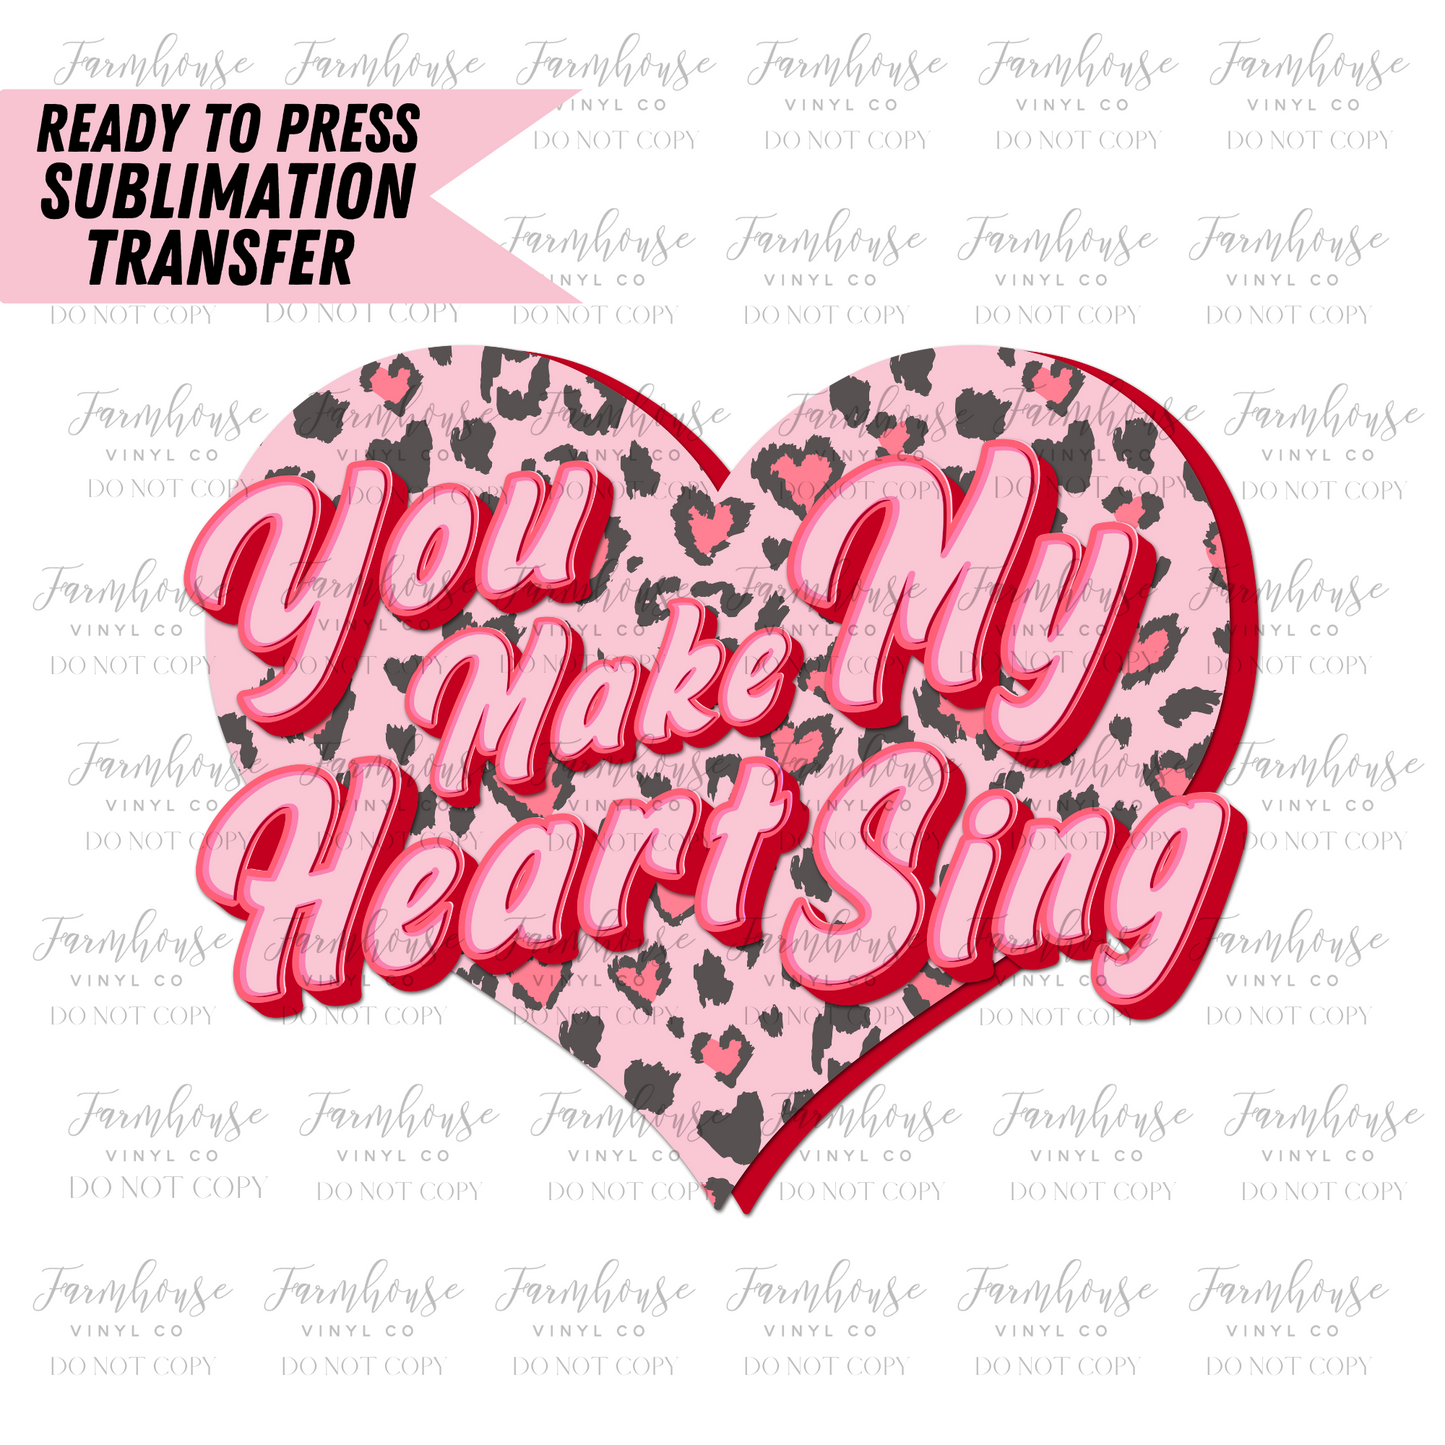 Wild Thing & You Make My Heart Sing Ready To Press Sublimation Transfer